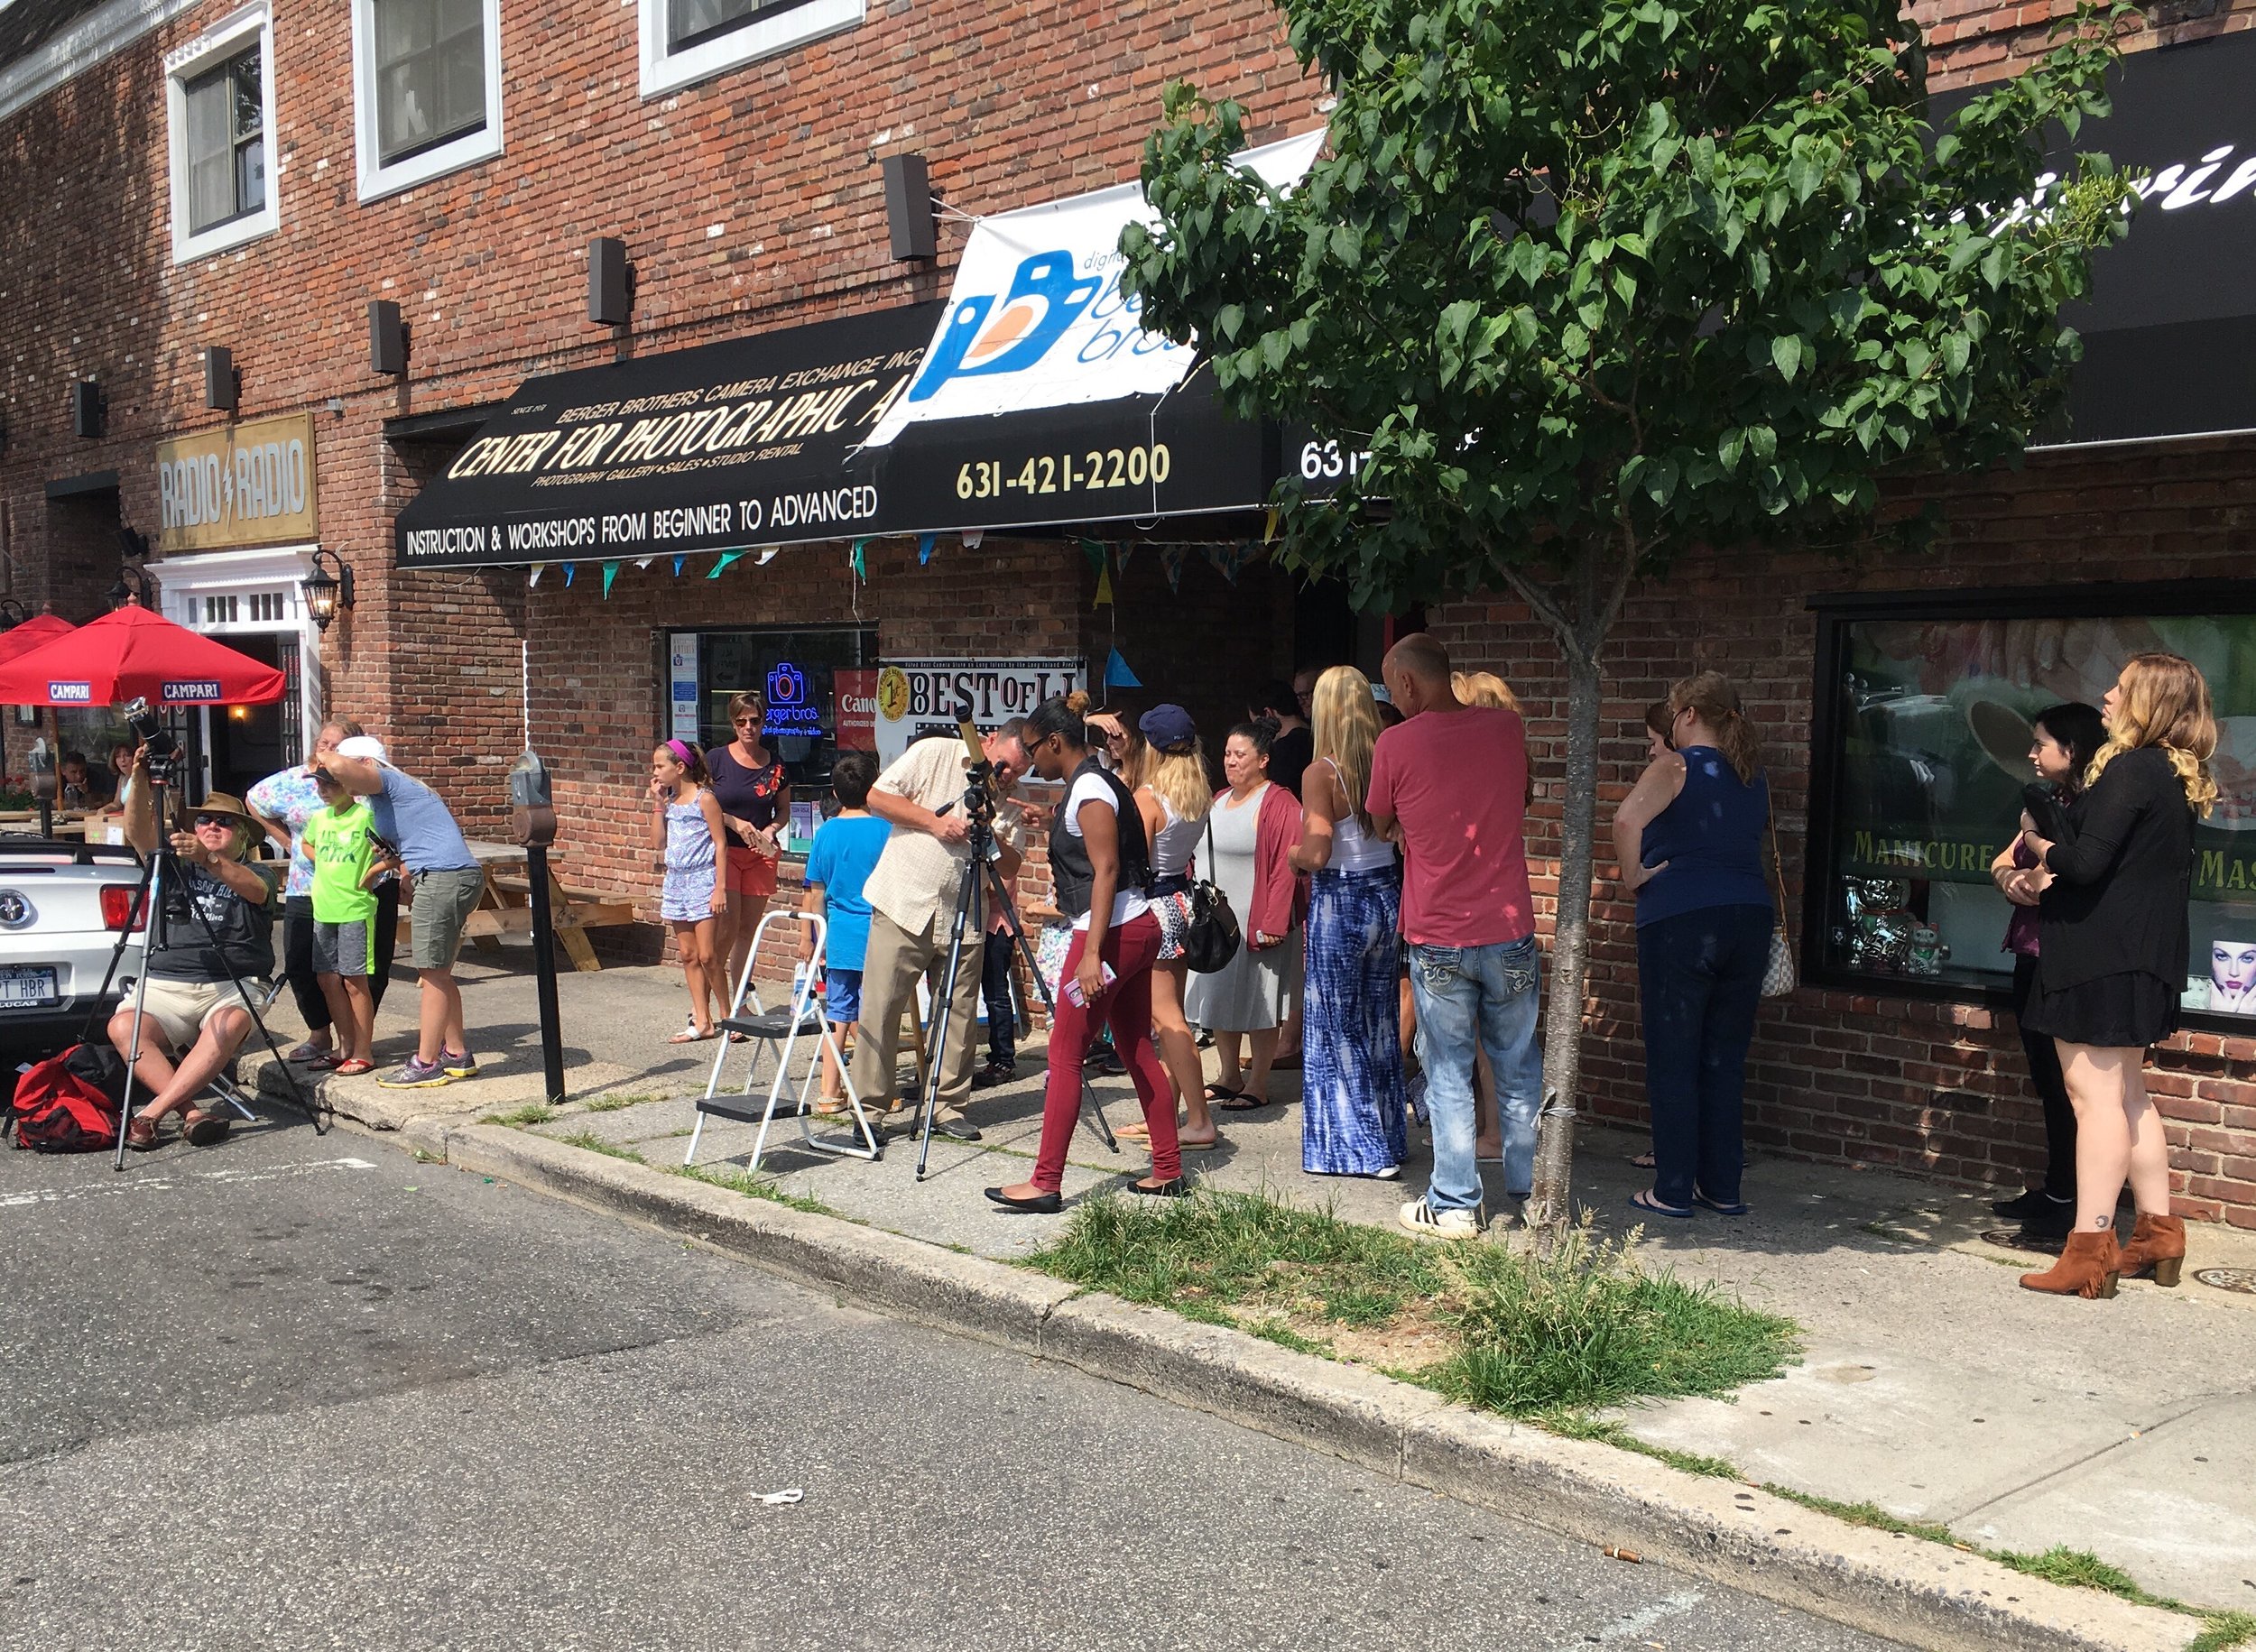  Local residents used telescopes set up outside Berger Bros to get a better view of today's solar eclipse.    Long Islander News photo/Paul Shapiro  